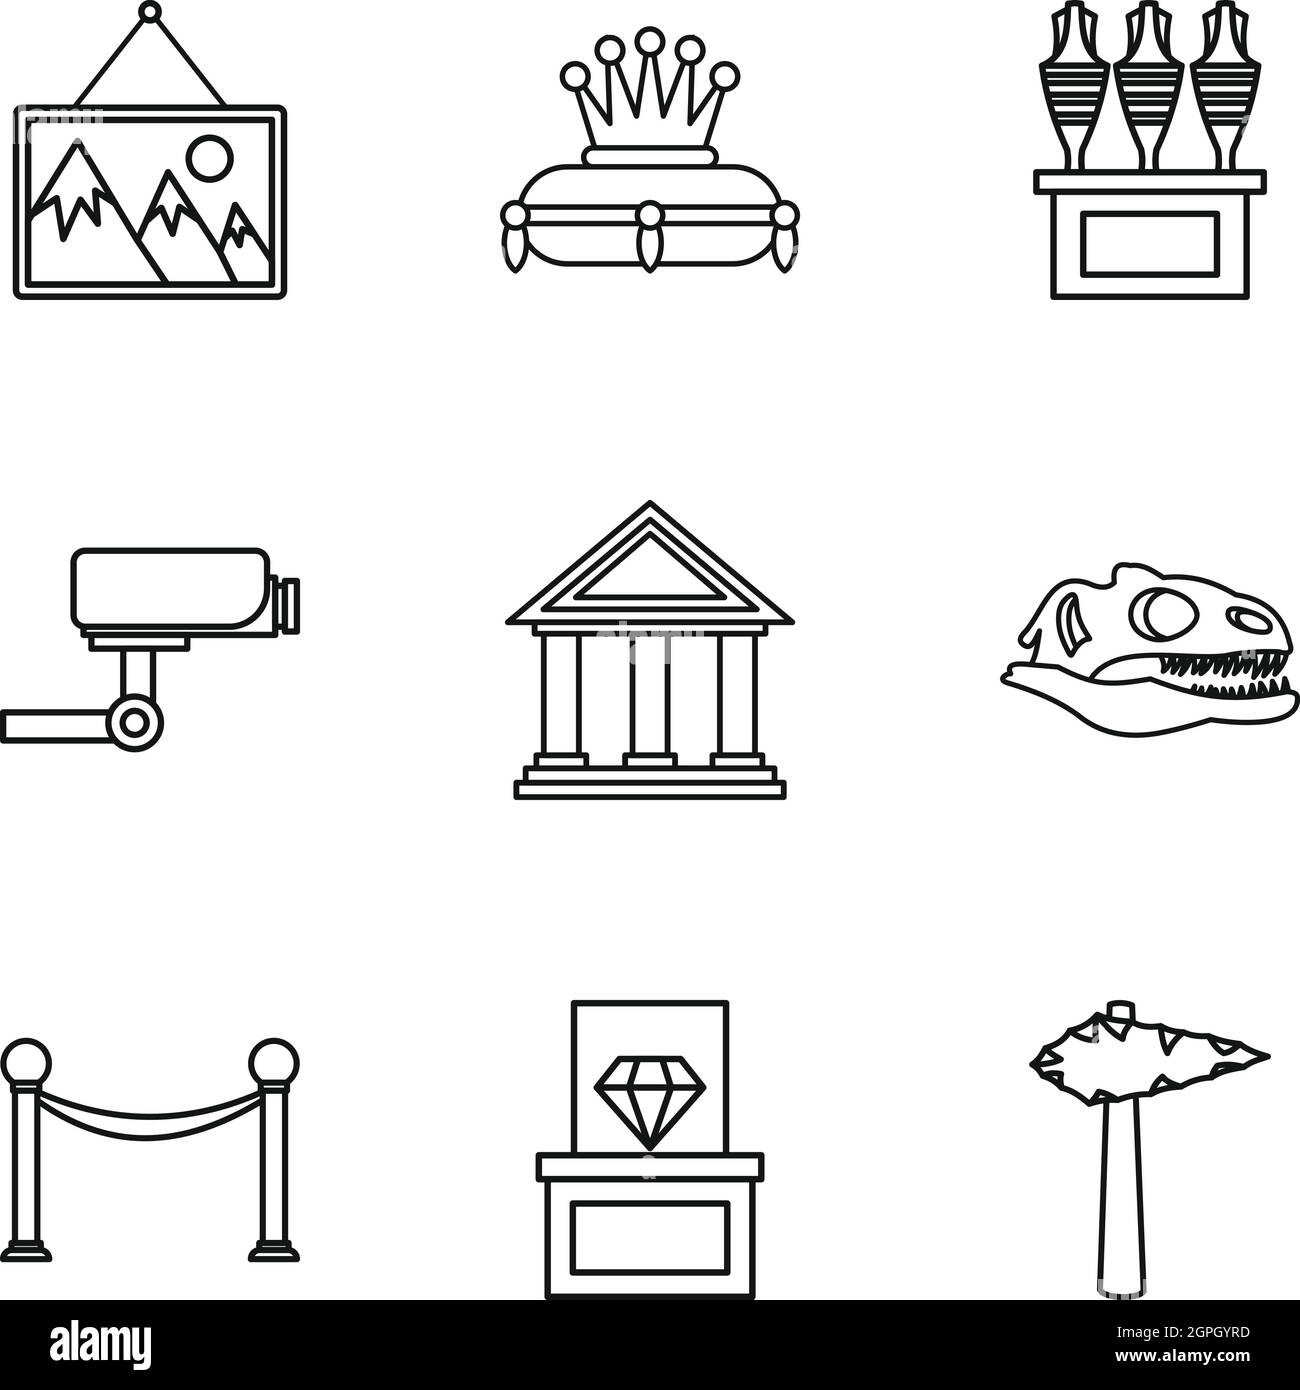 Gallery in museum icons set, outline style Stock Vector